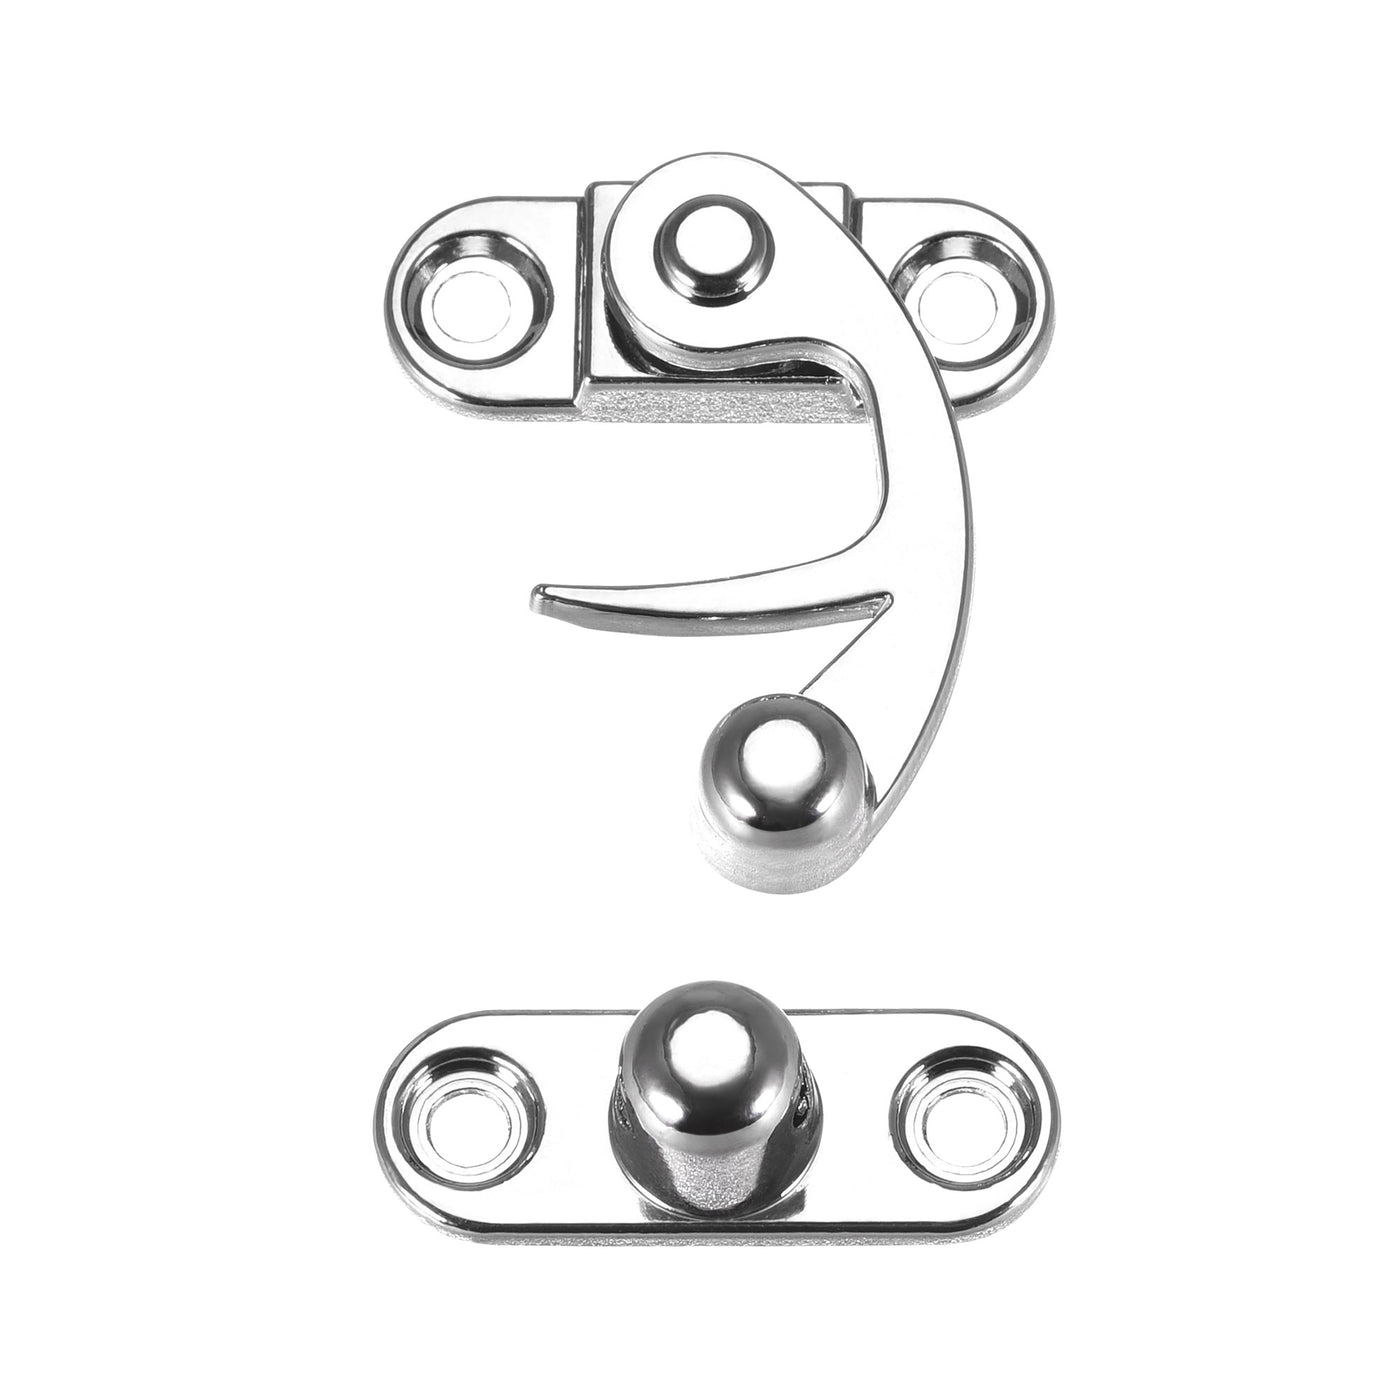 uxcell Uxcell Antique Vintage Lock Clasp Right Latch Hook Hasp 32mmx28mm Swing Arm Latch Silver Tone 5 Pcs